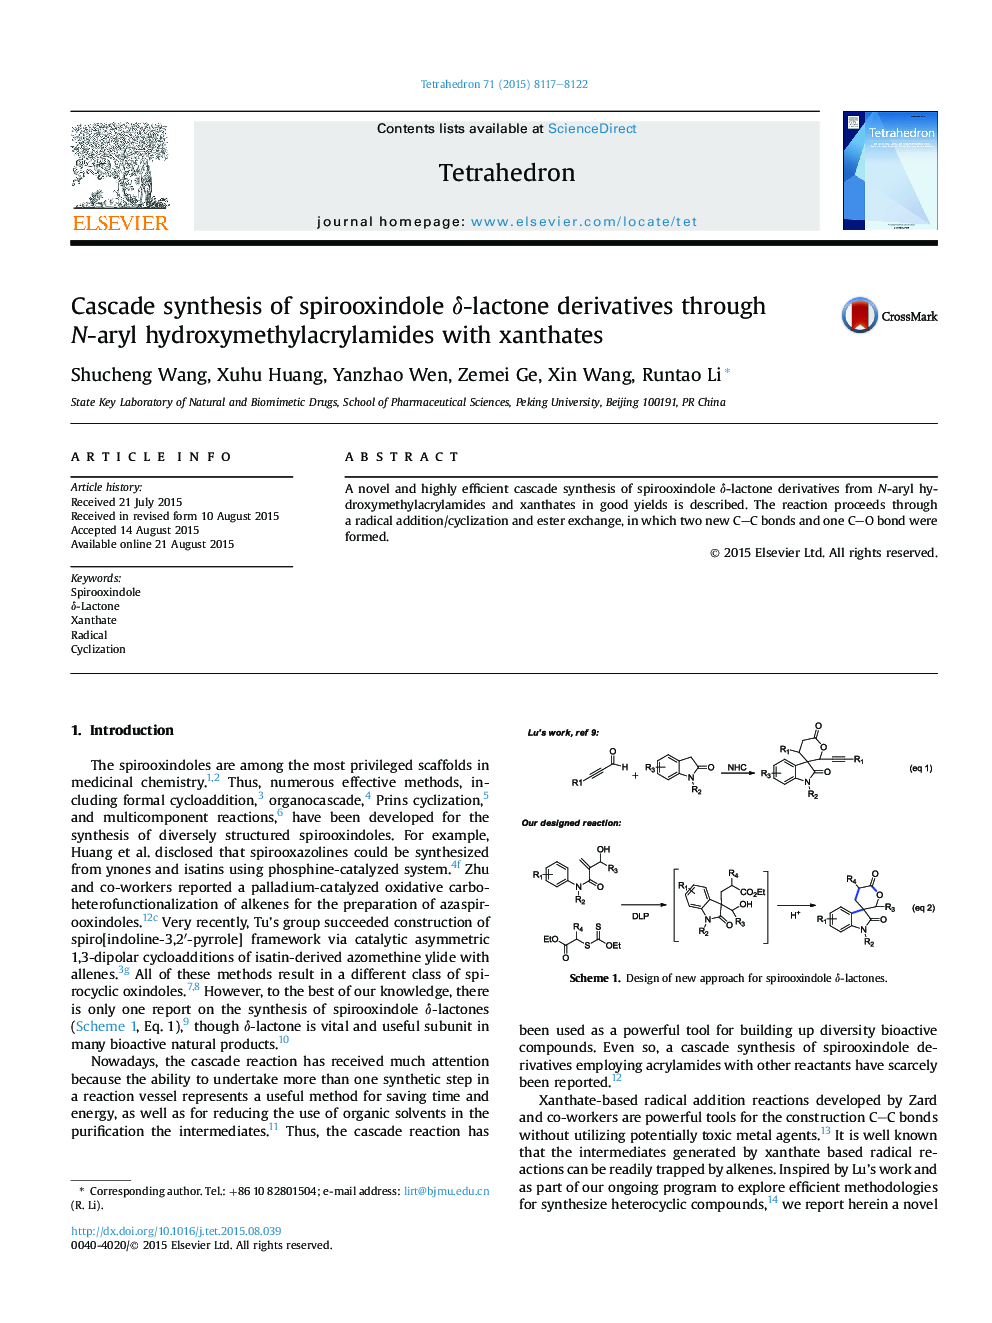 Cascade synthesis of spirooxindole Î´-lactone derivatives through N-aryl hydroxymethylacrylamides with xanthates